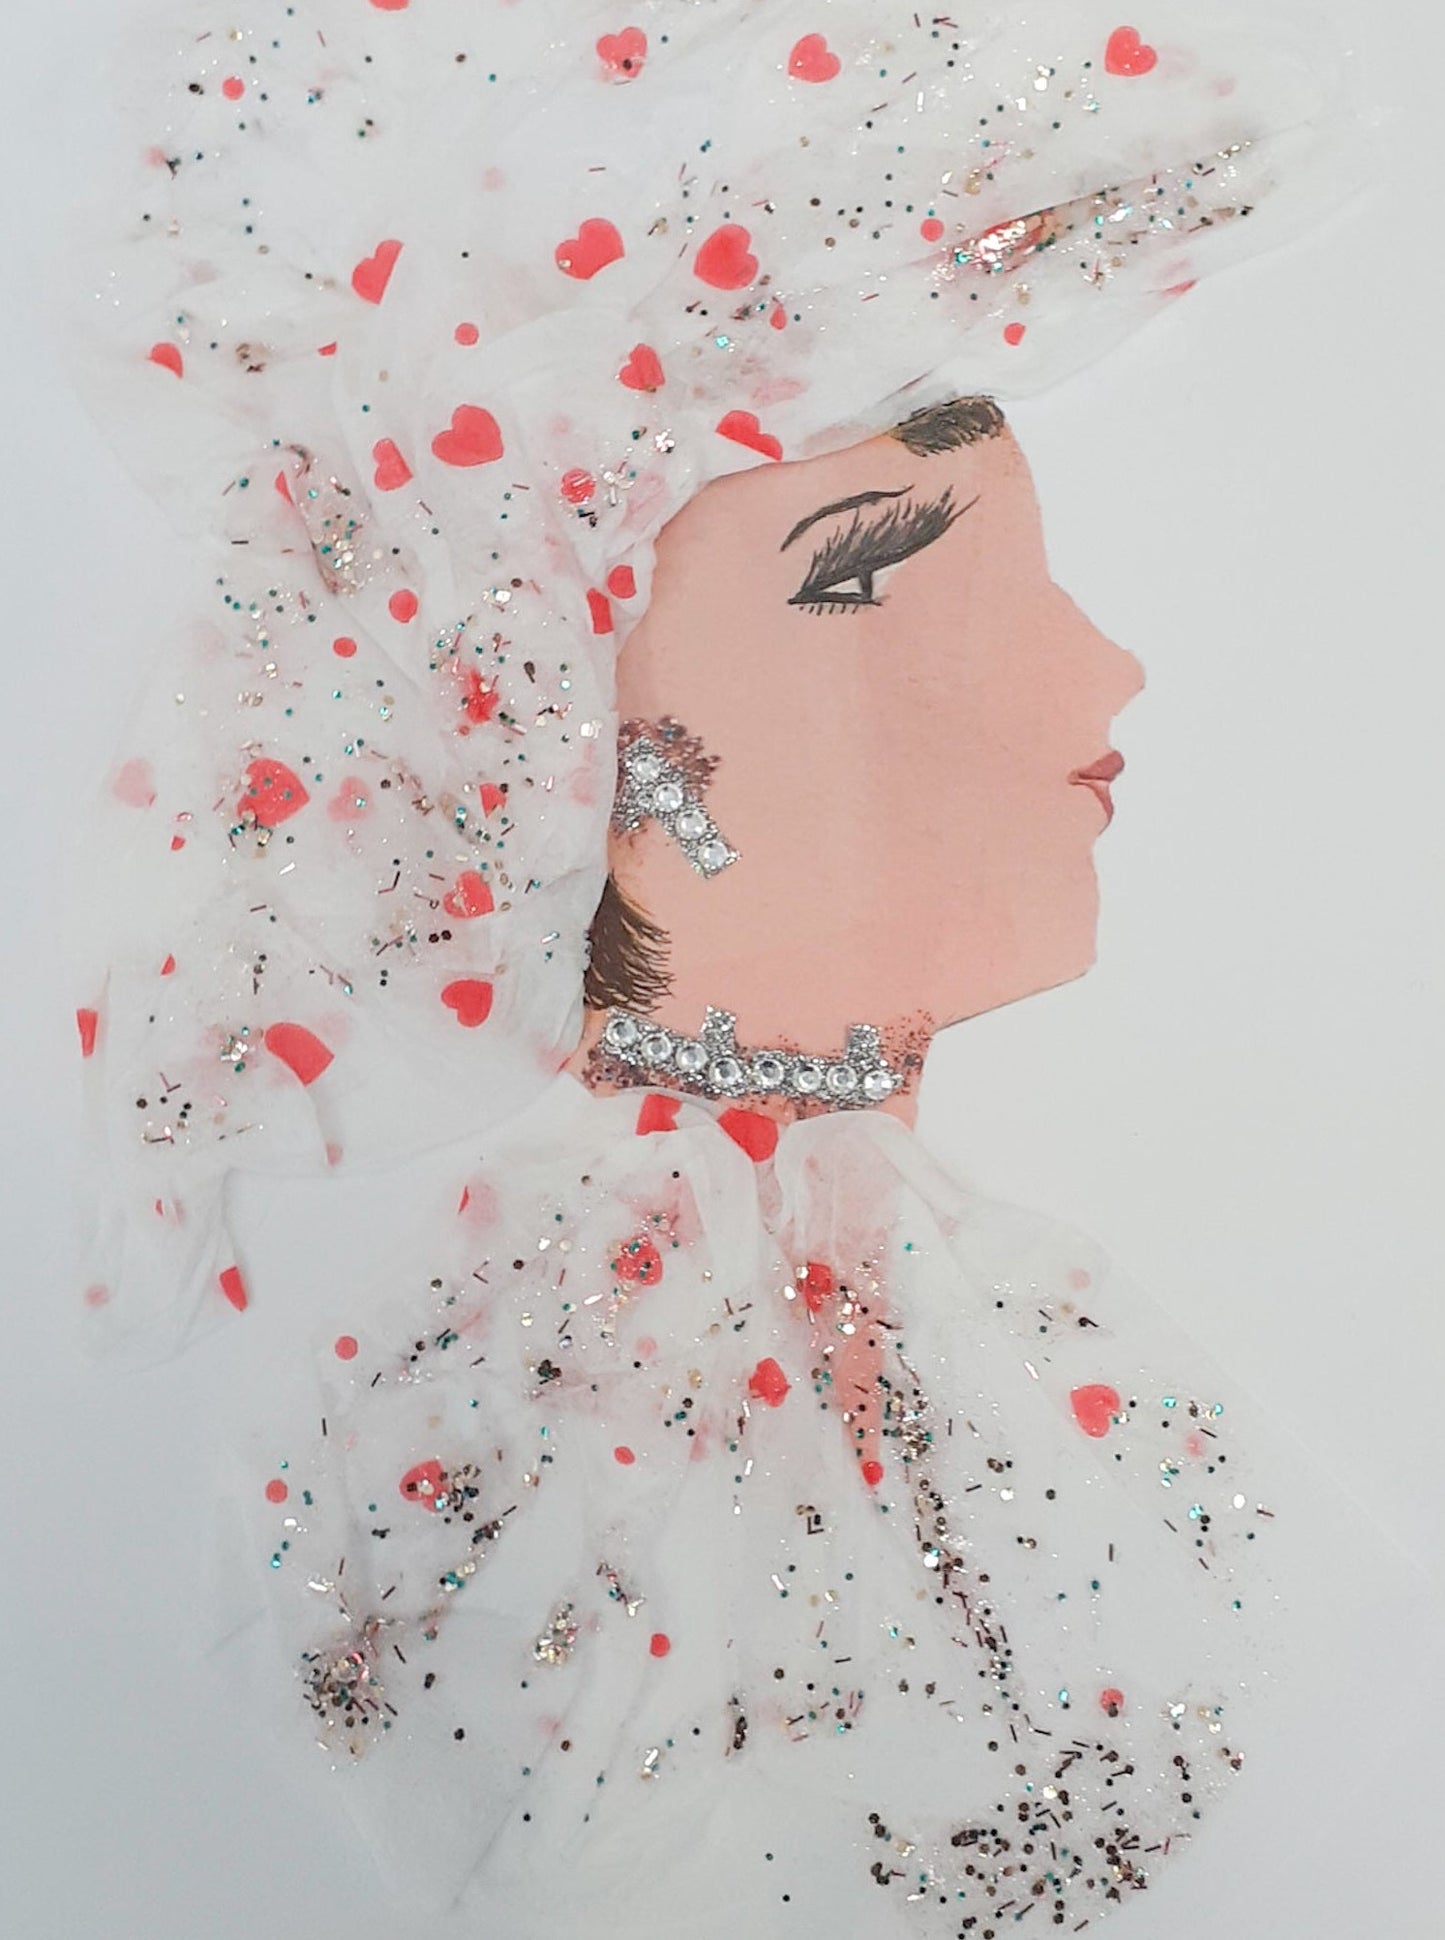 This card is of a woman called Avery. She wears a sheer white dress and matching headdress, which is covered in small red hearts and silver glitter. Her earrings and necklace are both small diamond-like crystals. 